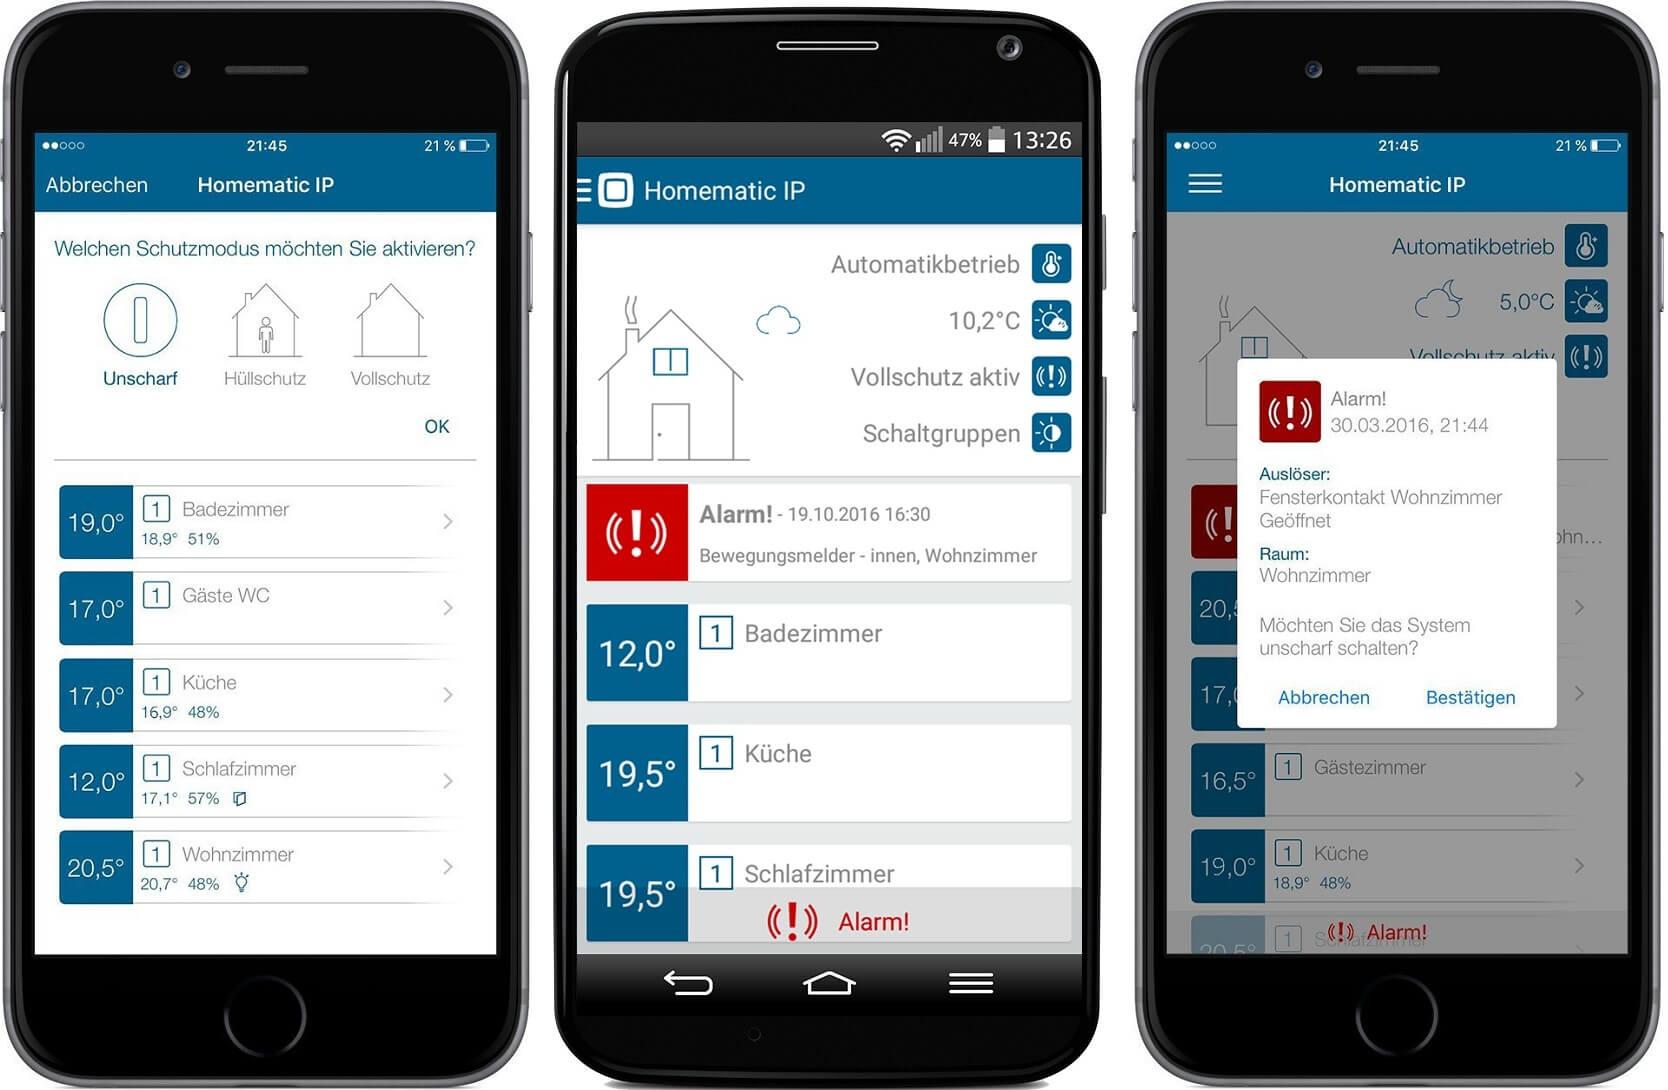 Homematic IP Alarmanlage | Smart and Home Systeme.de